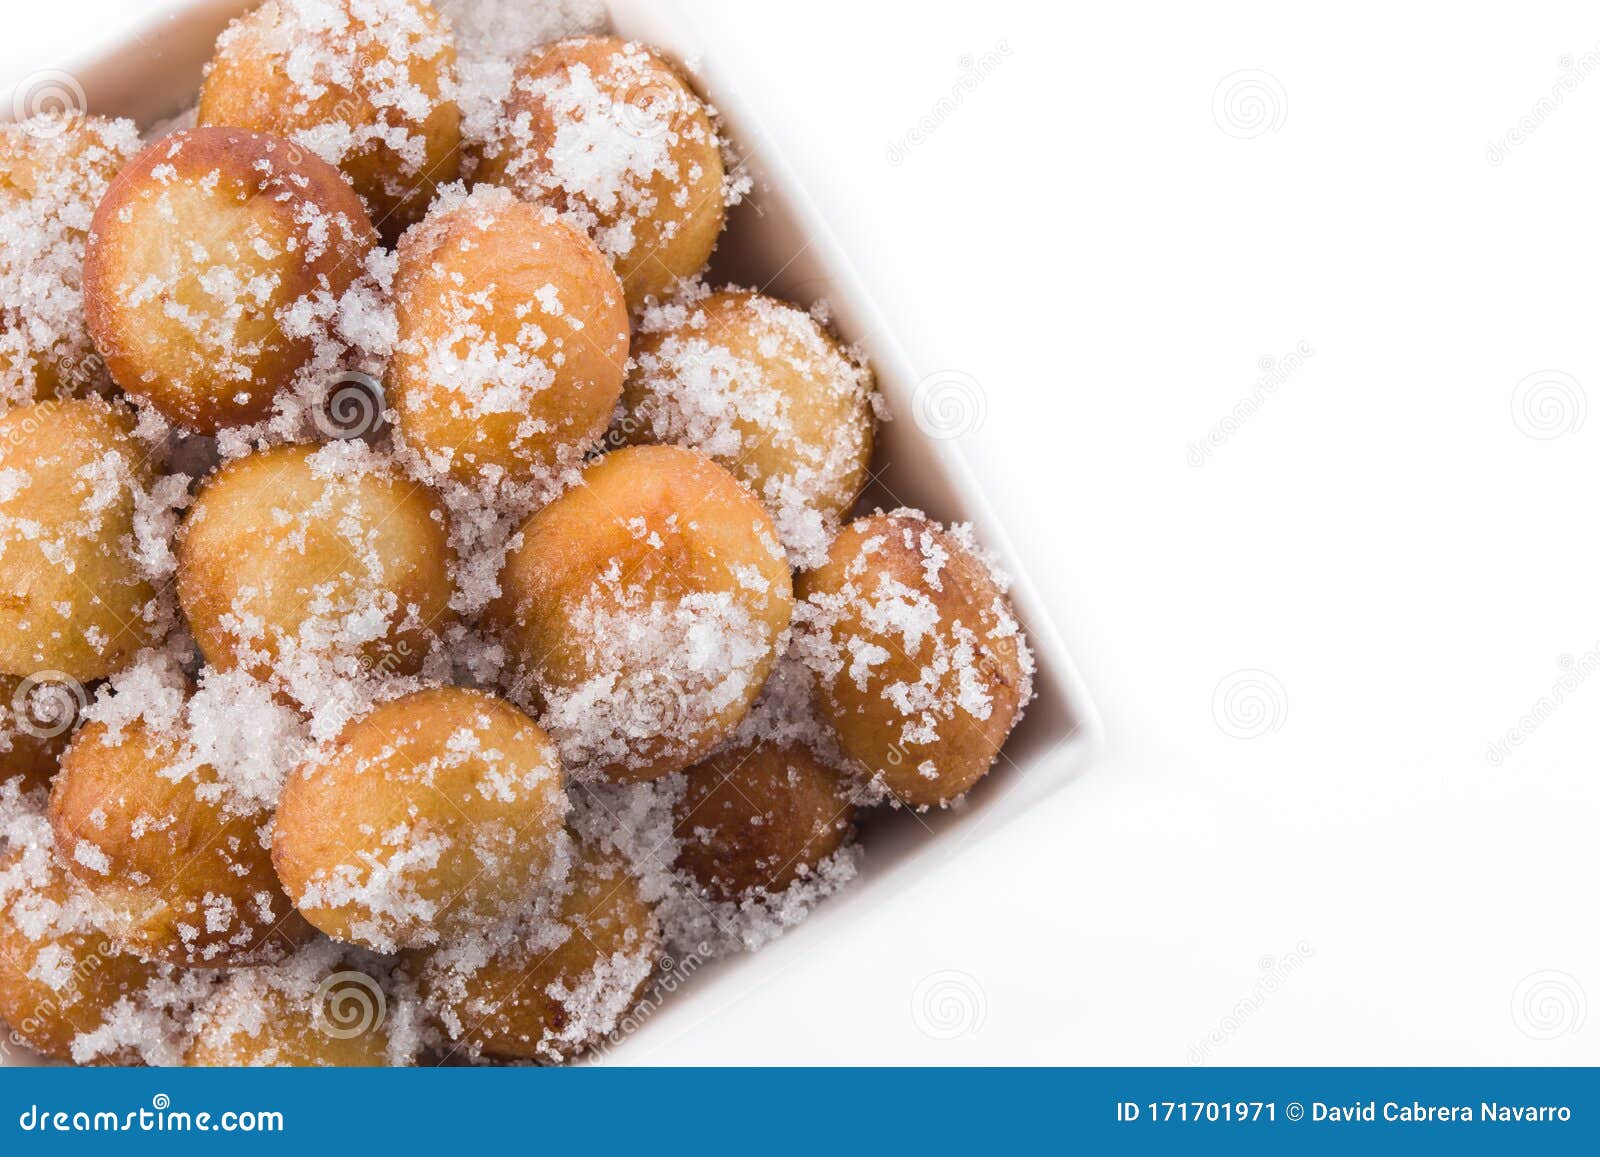 carnival fritters or buÃÂ±uelos de viento for holy week